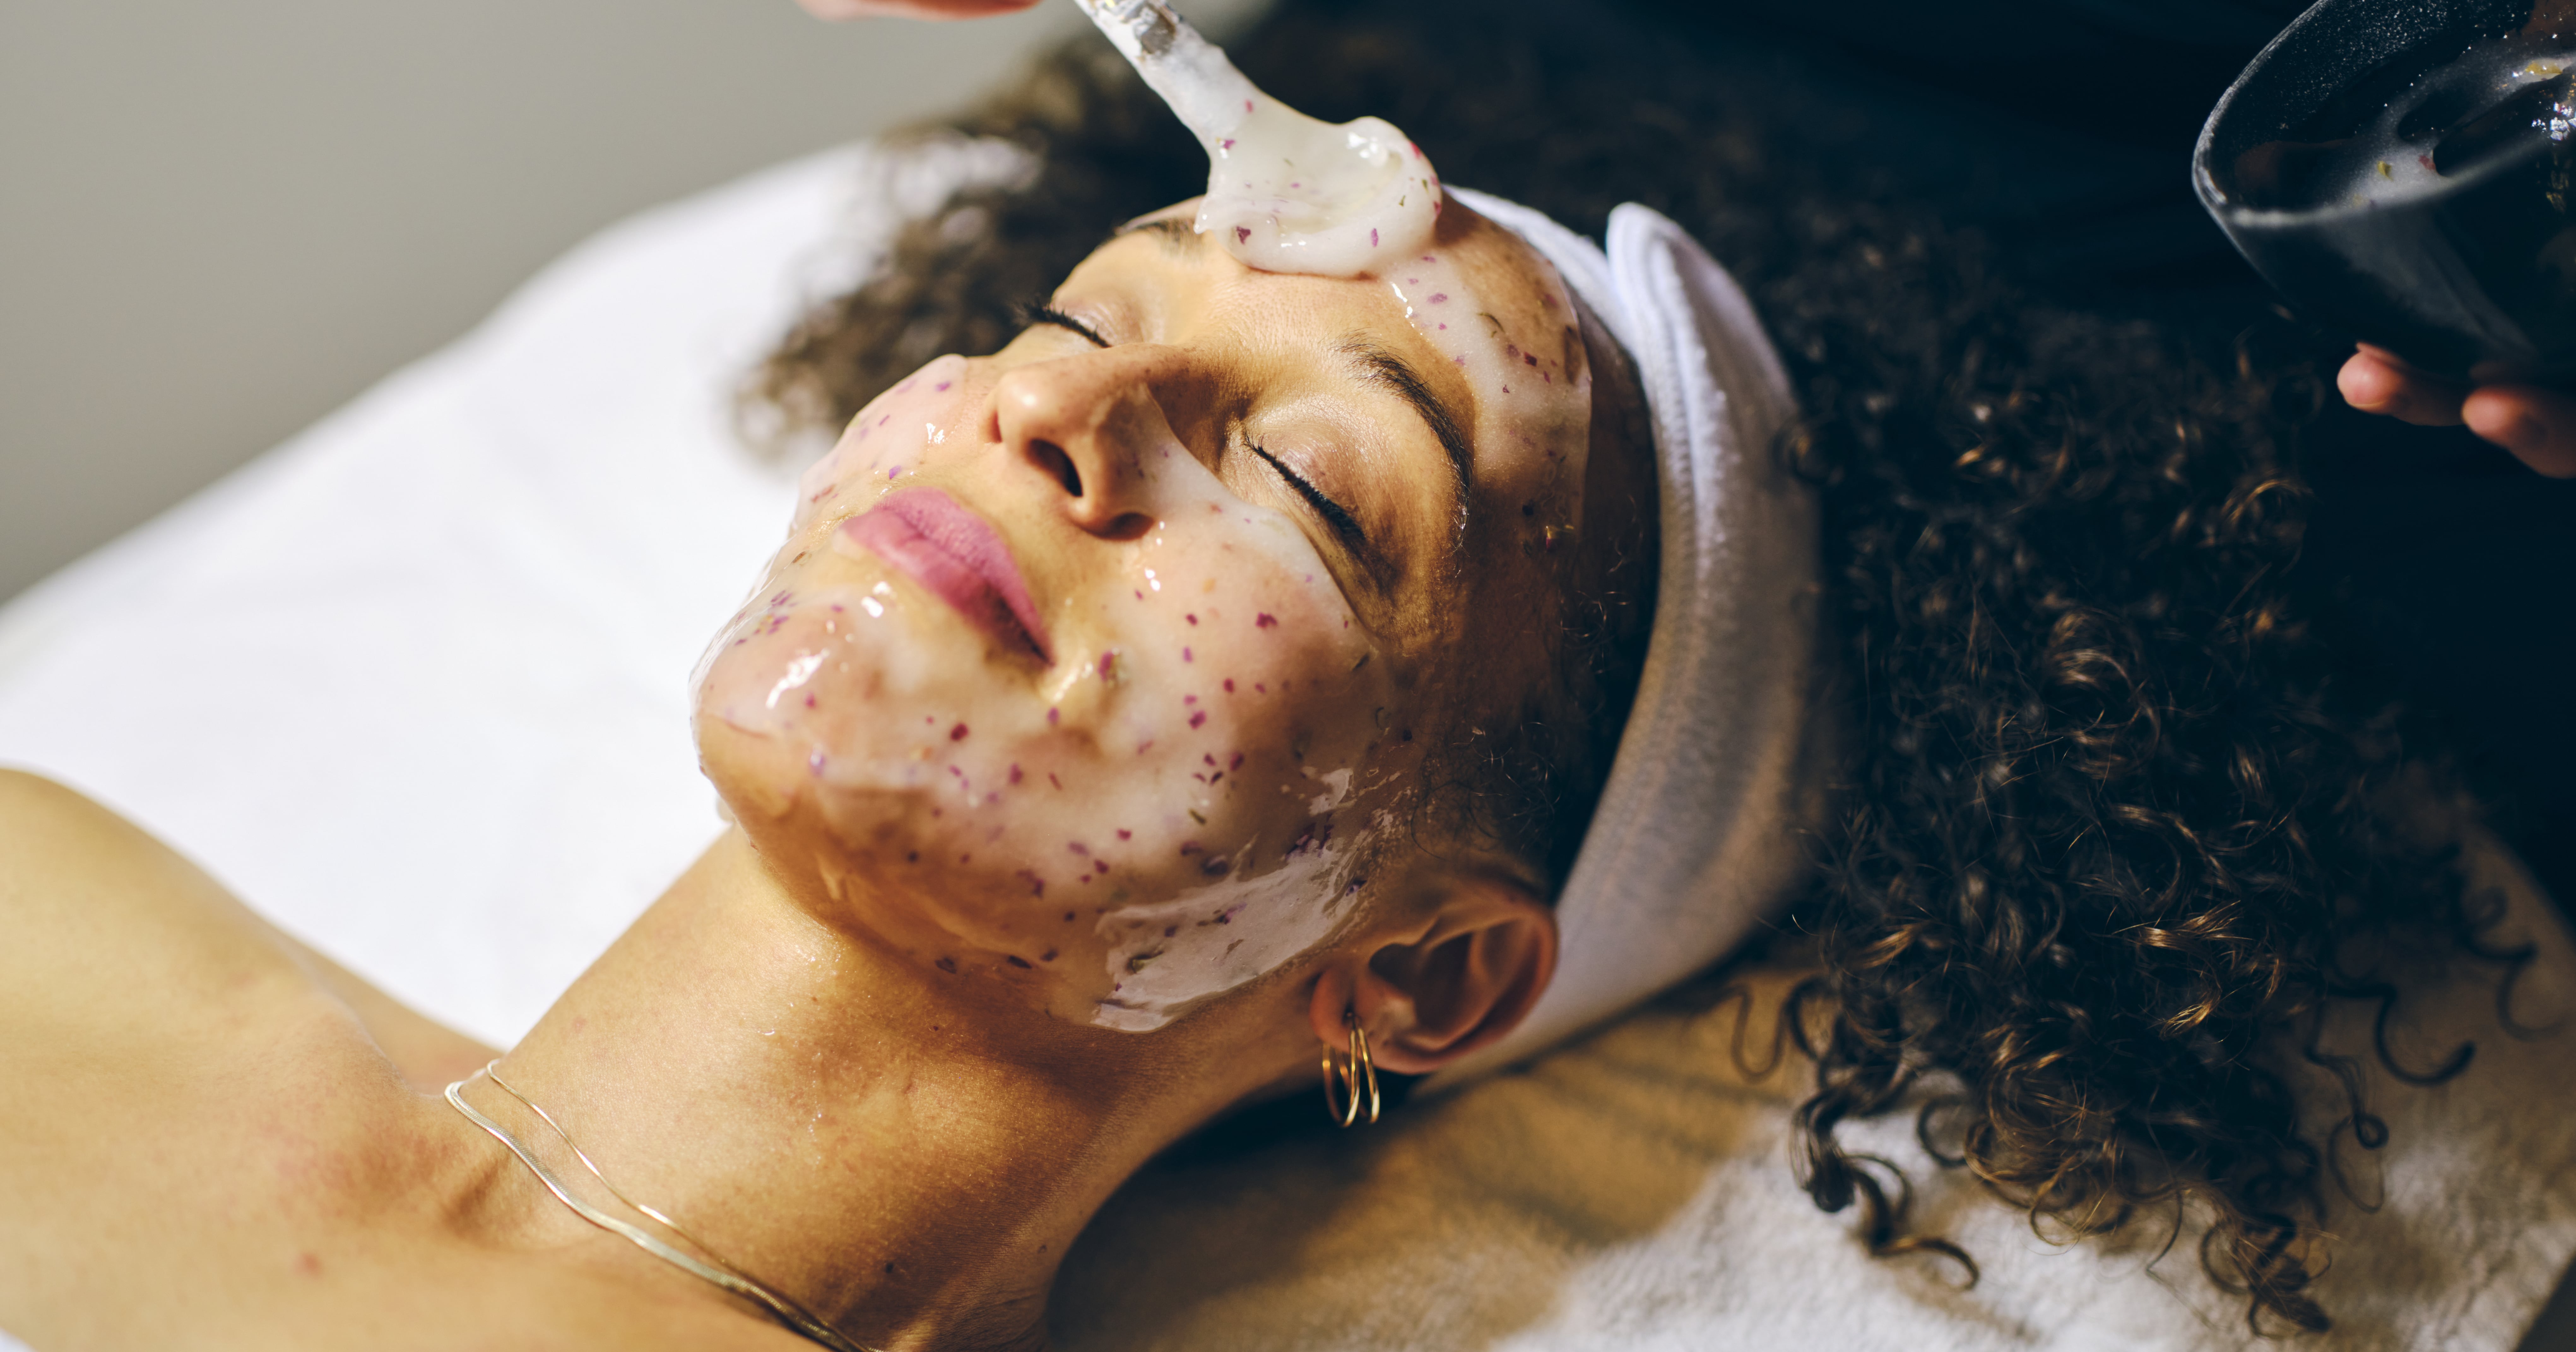 Everything You Want to Know About Getting a Facial, Answered